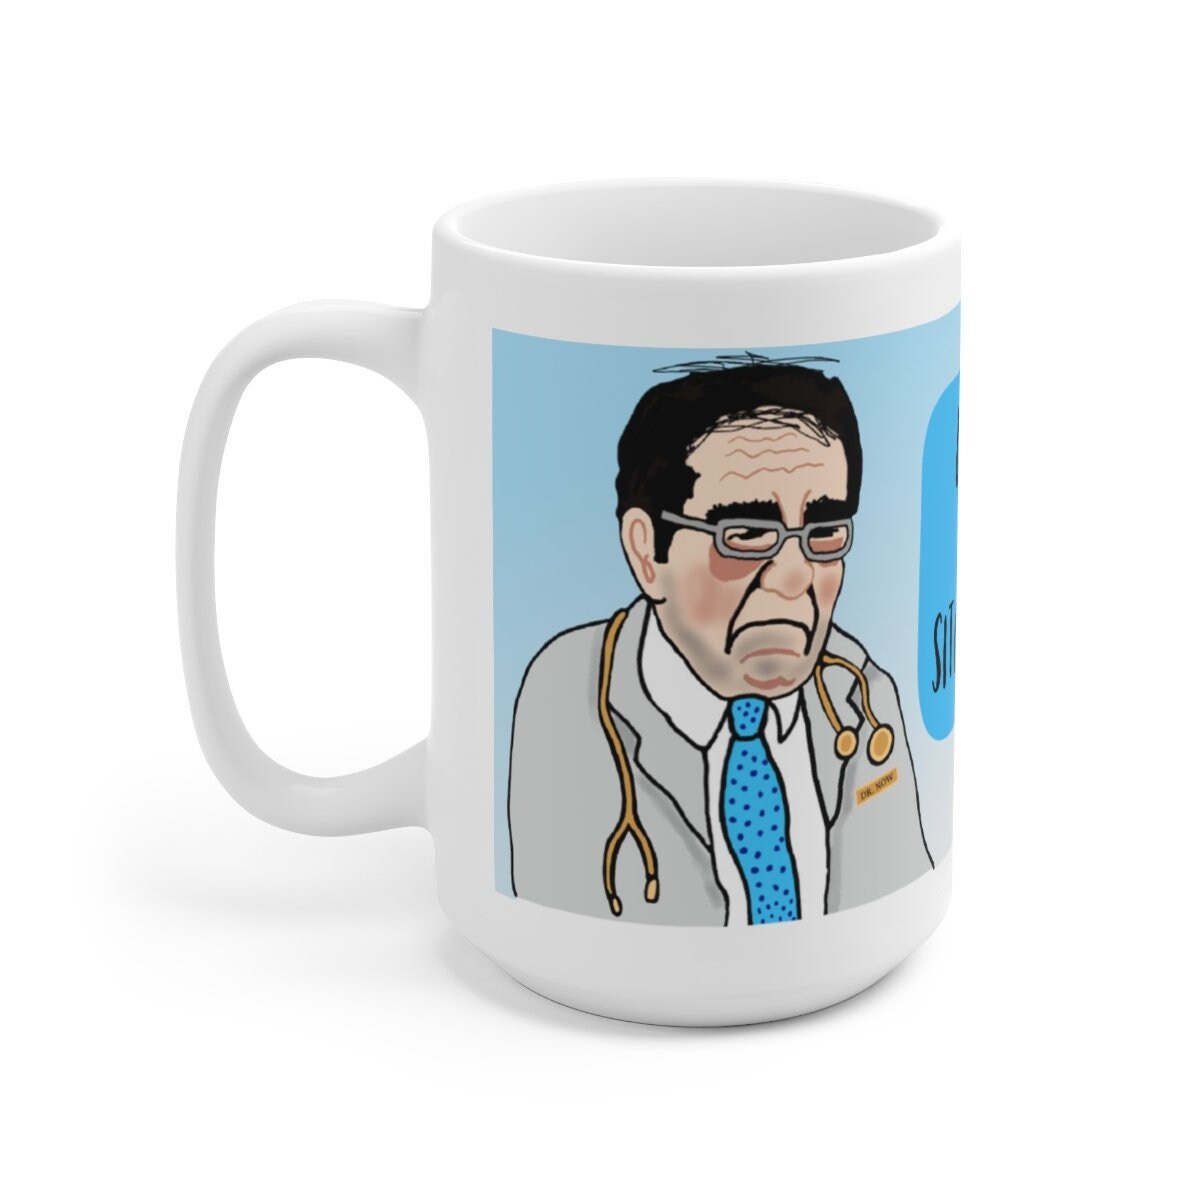 ECKOI Novelty Dr. Now Mug Dr. Nowzaradan Dr. Now gift My 600 lb life You  have one munt to lose turdy pounds Dr. Now Funny Coffee Mug Cool Dad Gifts